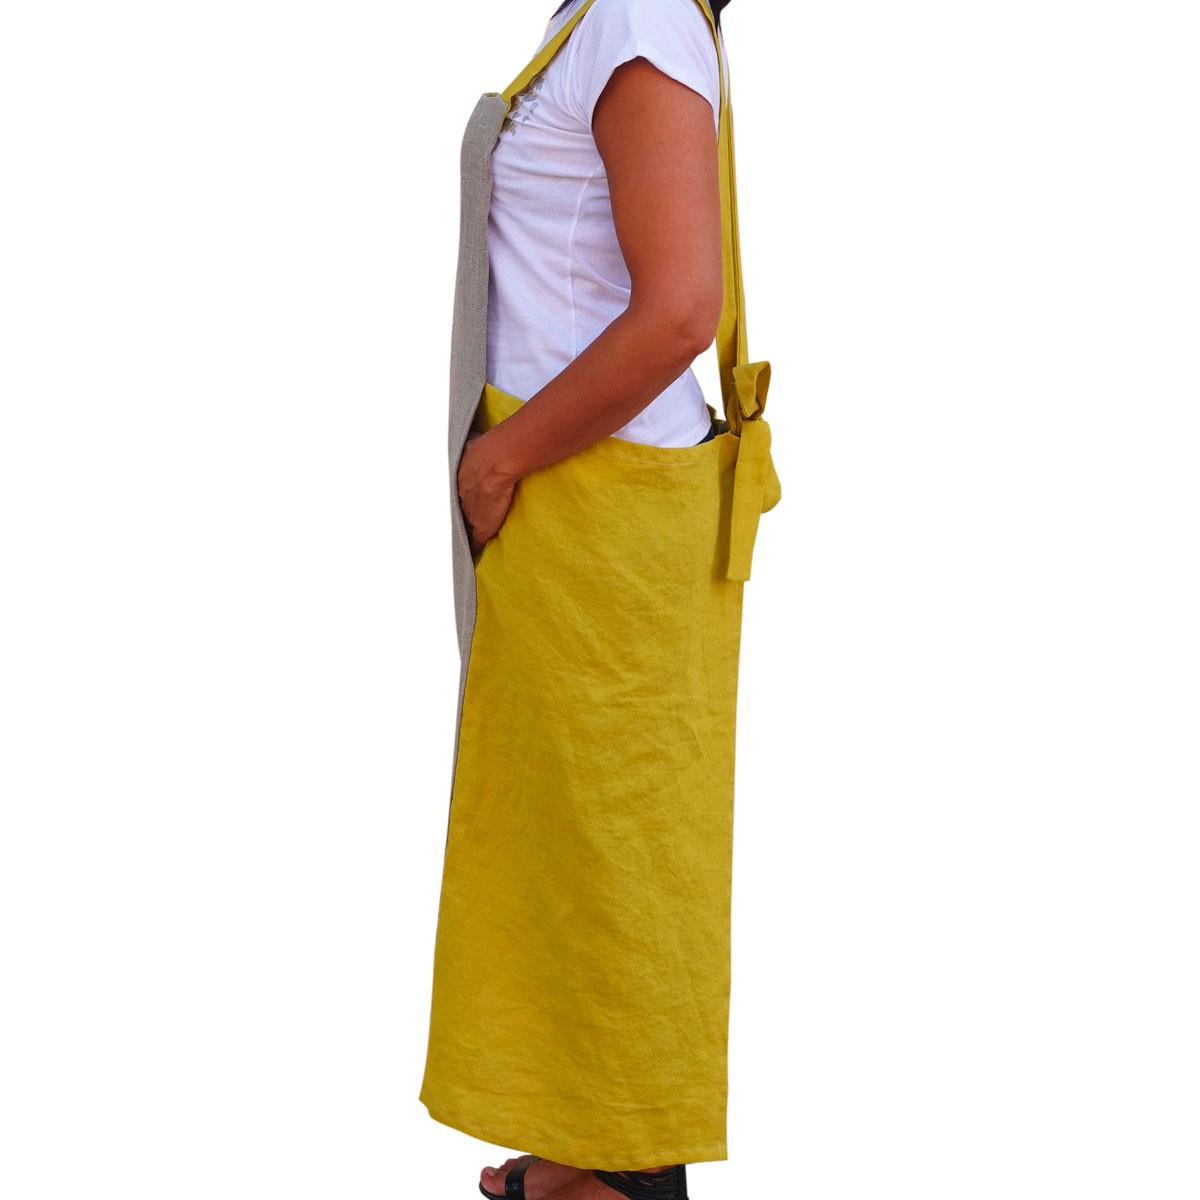 Apron - Washed linen